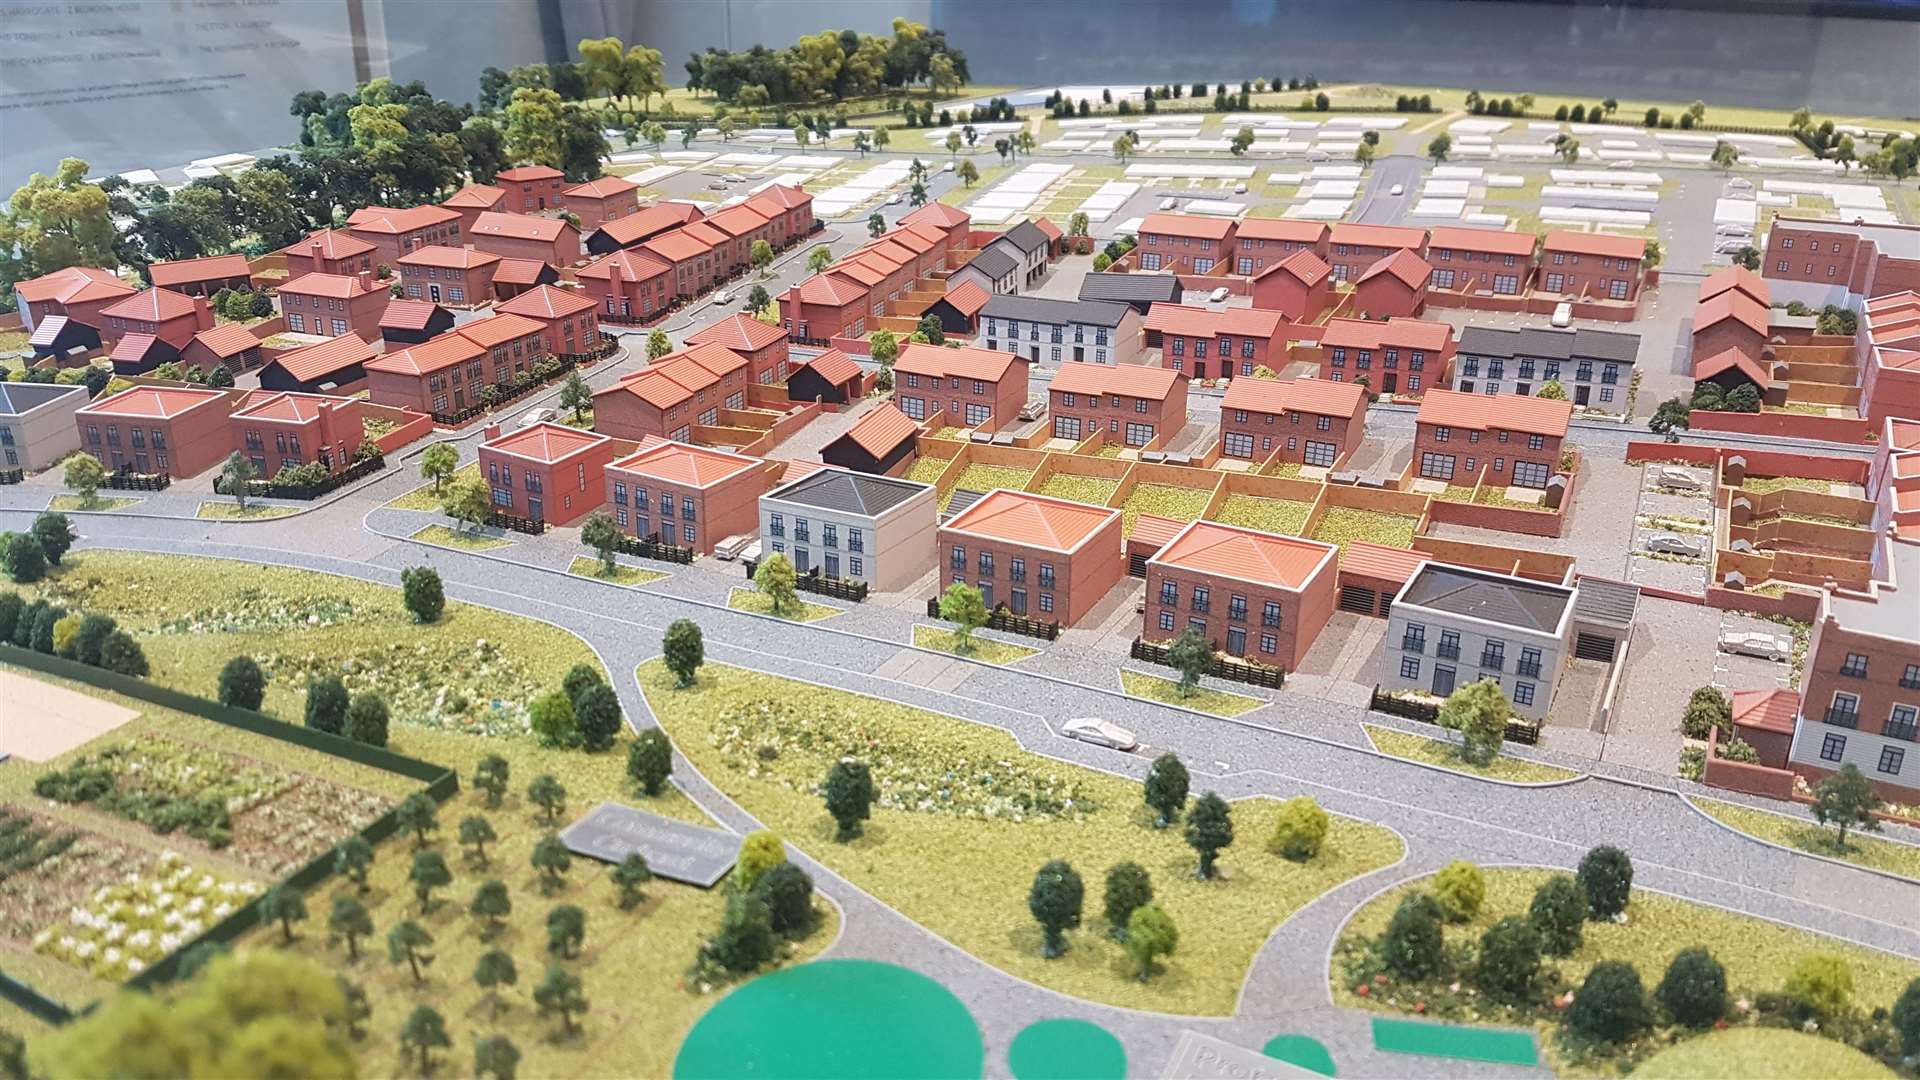 The first phase includes 27 homes